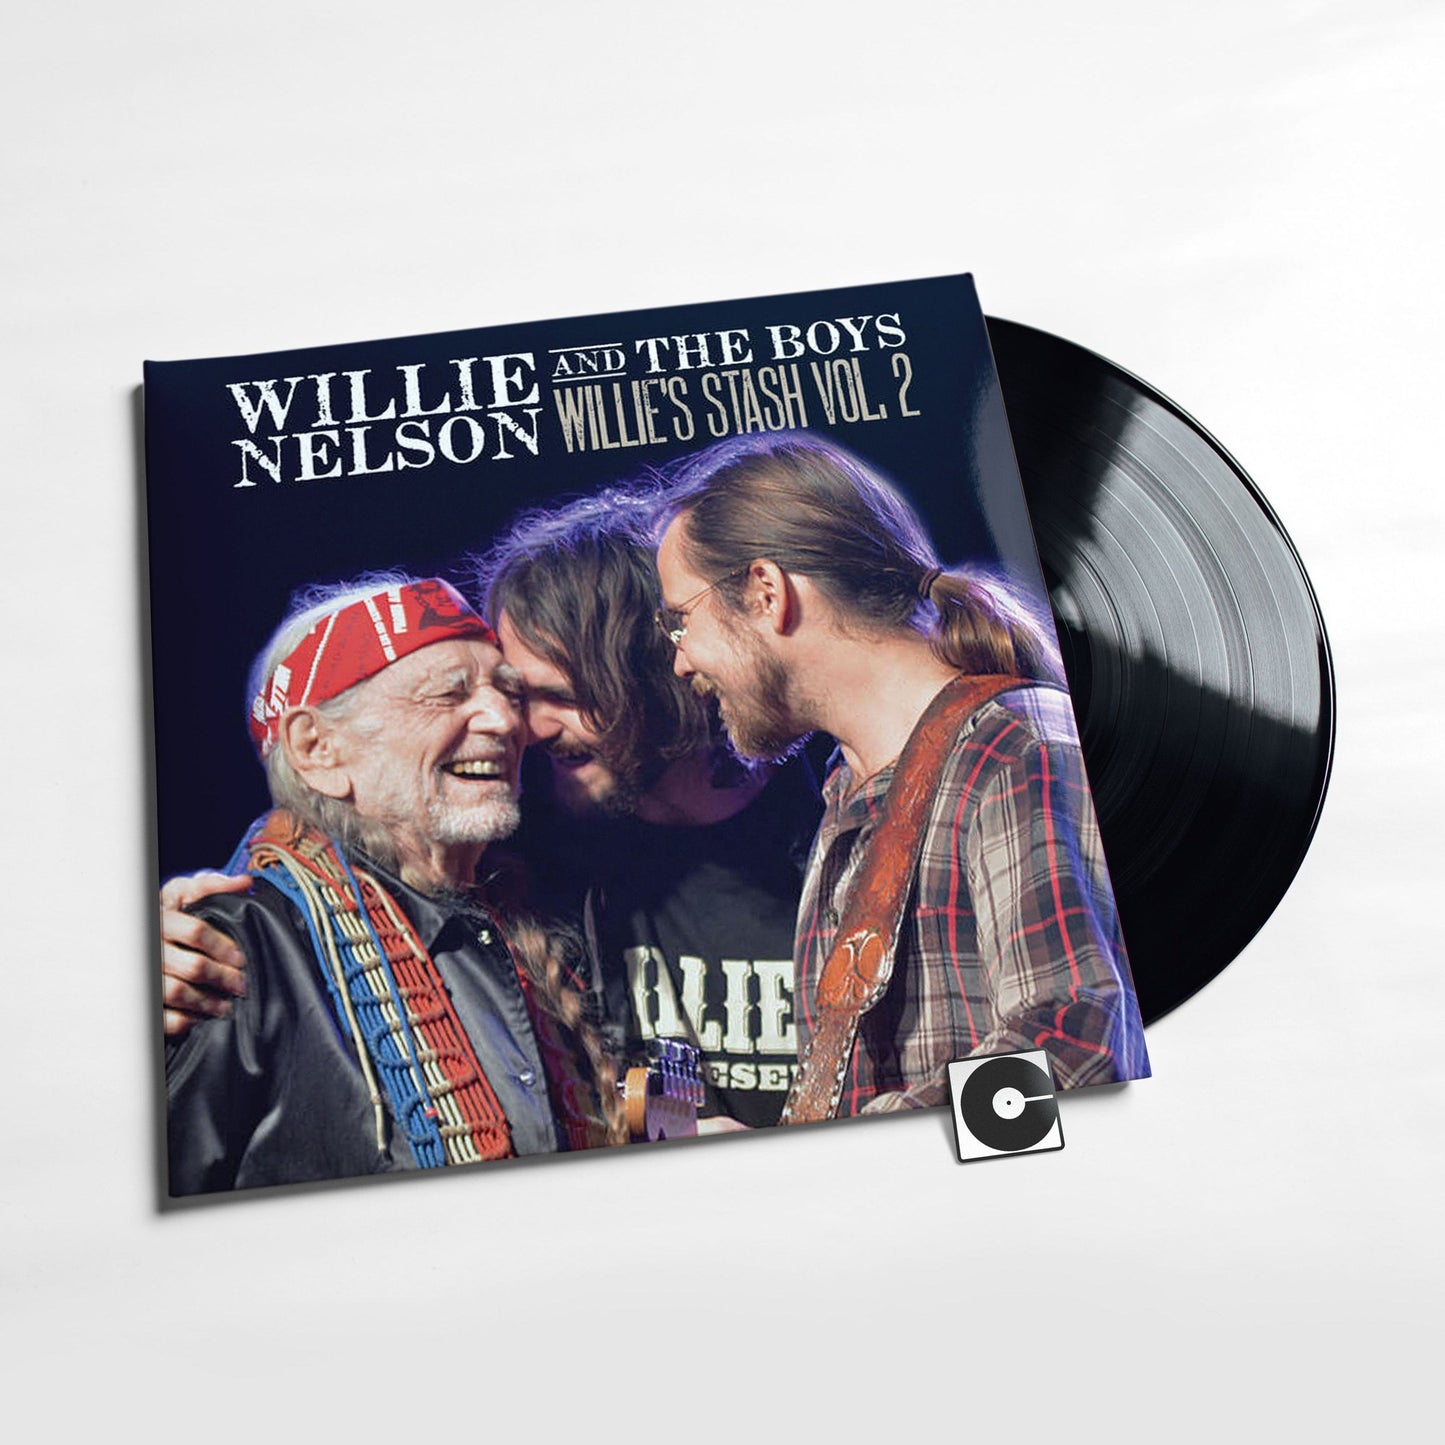 Willie Nelson - "Willie Nelson And The Boys: Willie's Stash, Vol. 2"